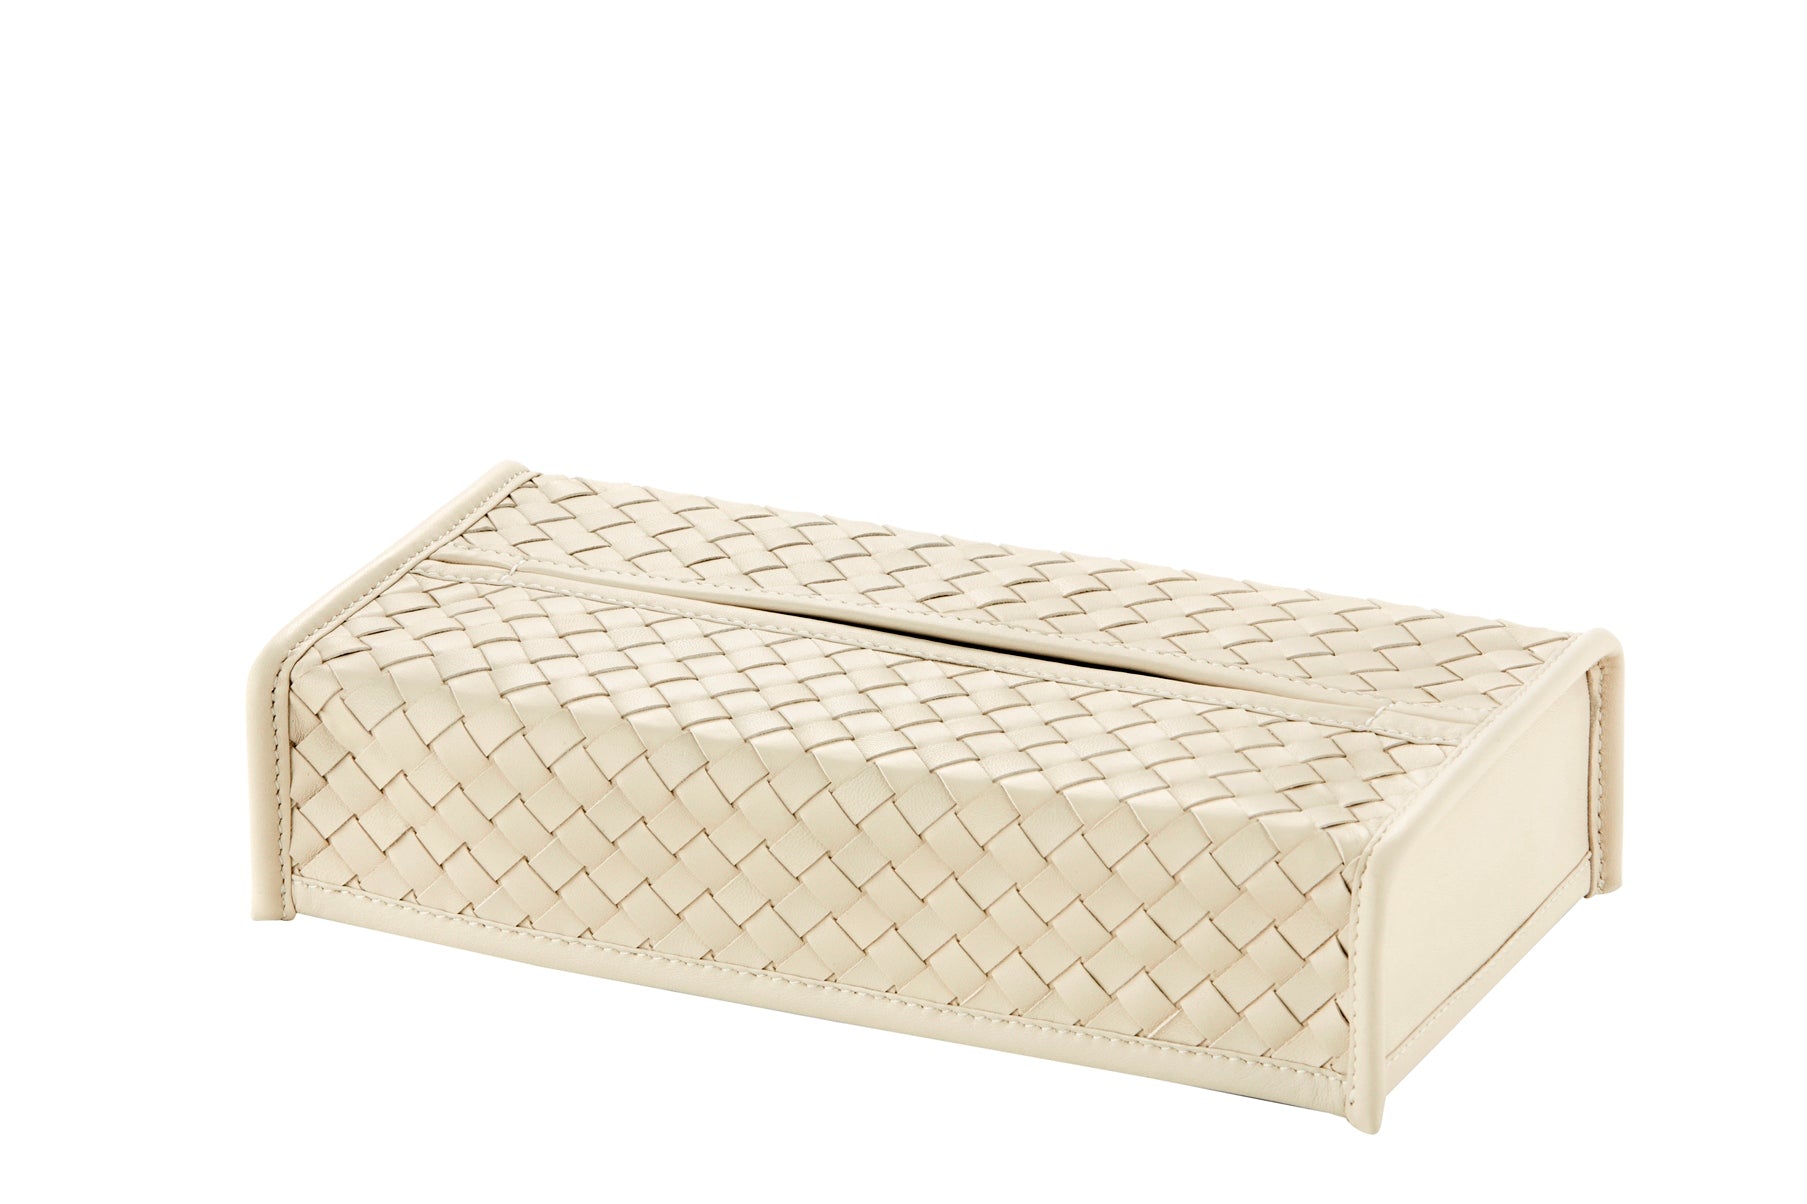 Riviere Elba Handwoven Leather Tissue Holder Rectangular | Handwoven Leather | Elegant Rectangular Design | Perfect for Yacht Interiors | Available at 2Jour Concierge, #1 luxury high-end gift & lifestyle shop